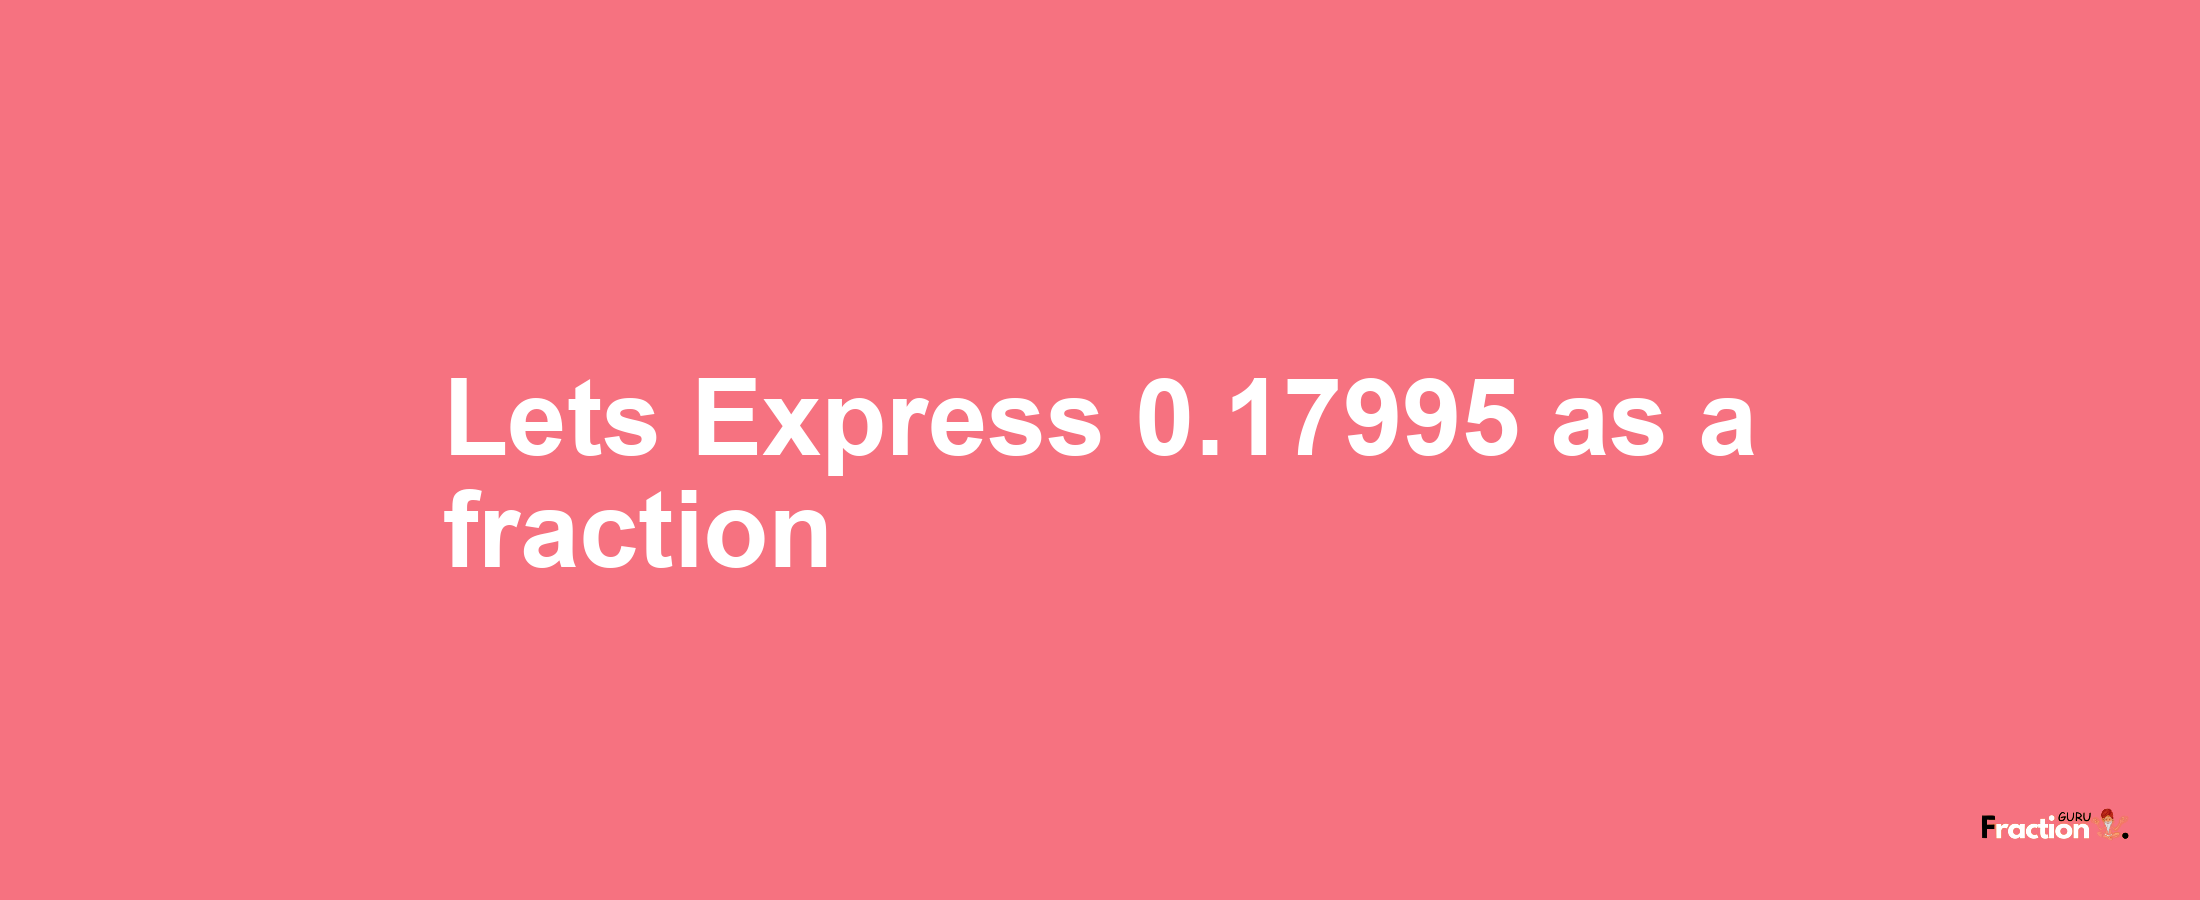 Lets Express 0.17995 as afraction